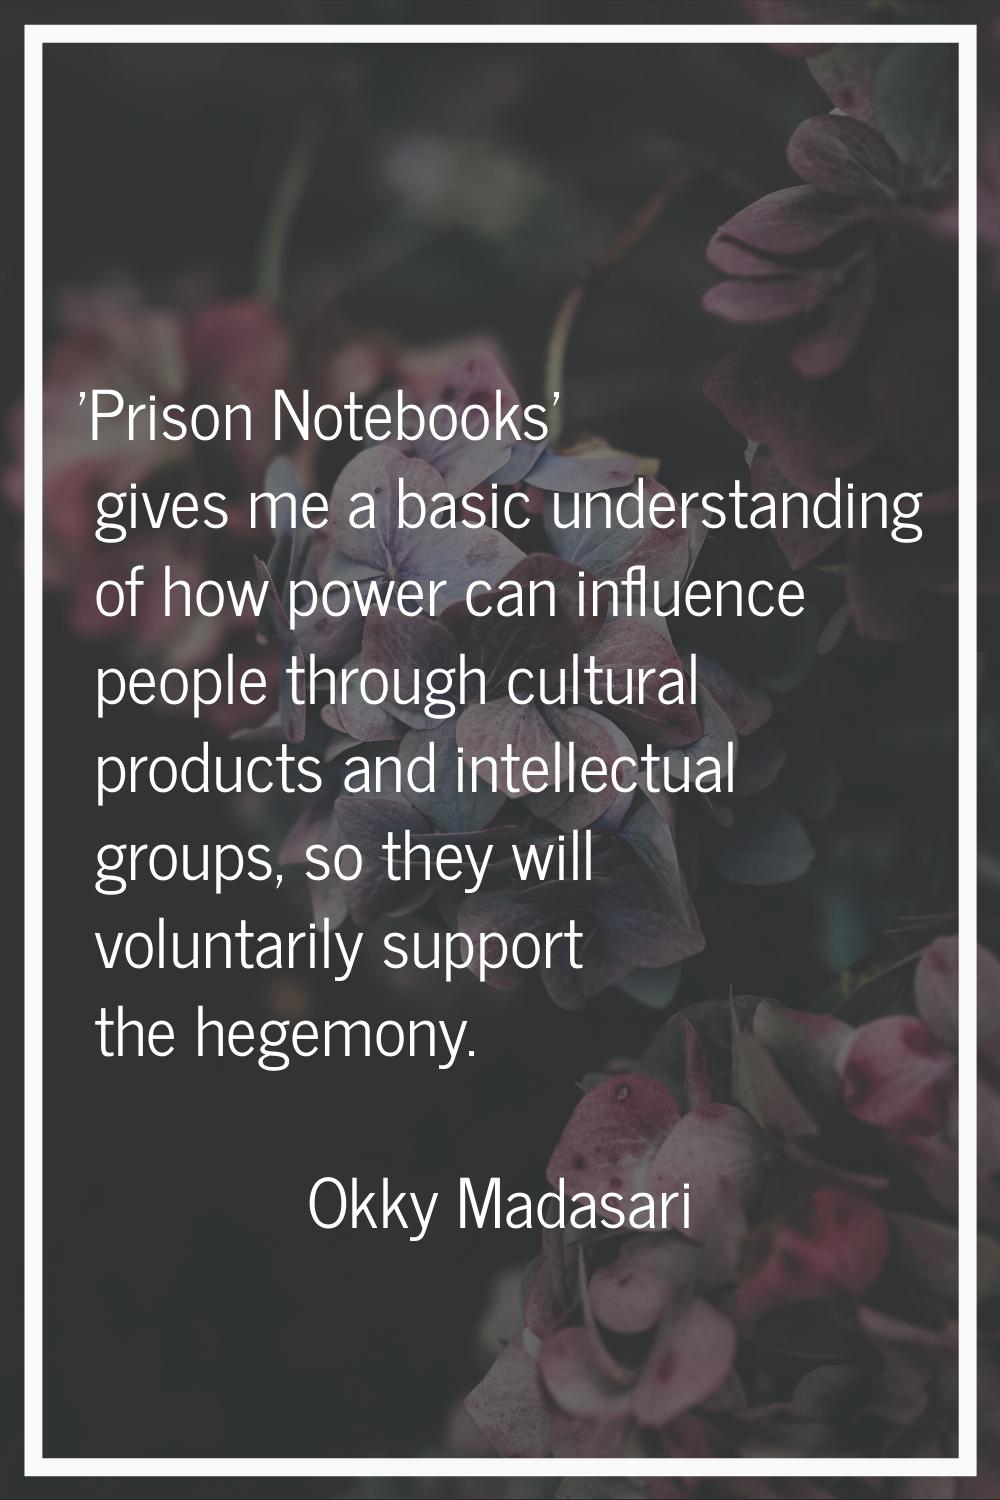 'Prison Notebooks' gives me a basic understanding of how power can influence people through cultura